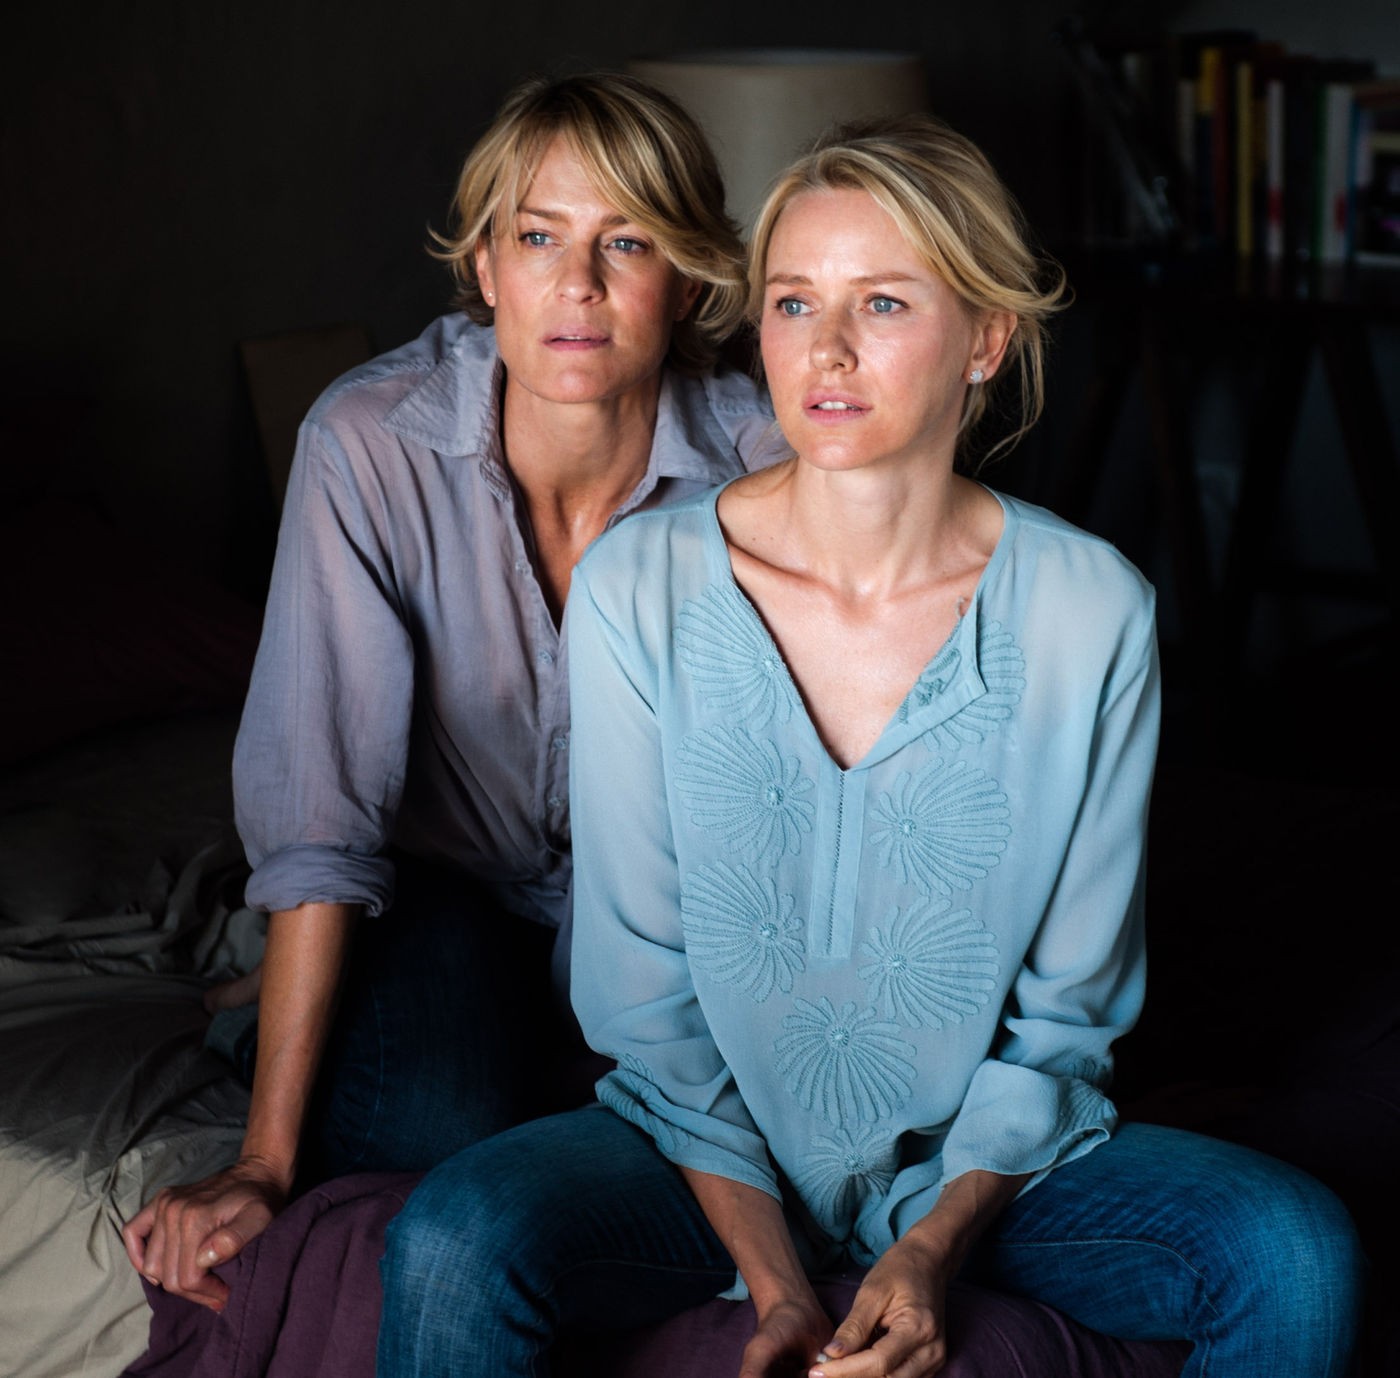 Robin Wright Penn stars as Roz and Naomi Watts stars as Lil in Exclusive Releasing's Adore (2013)